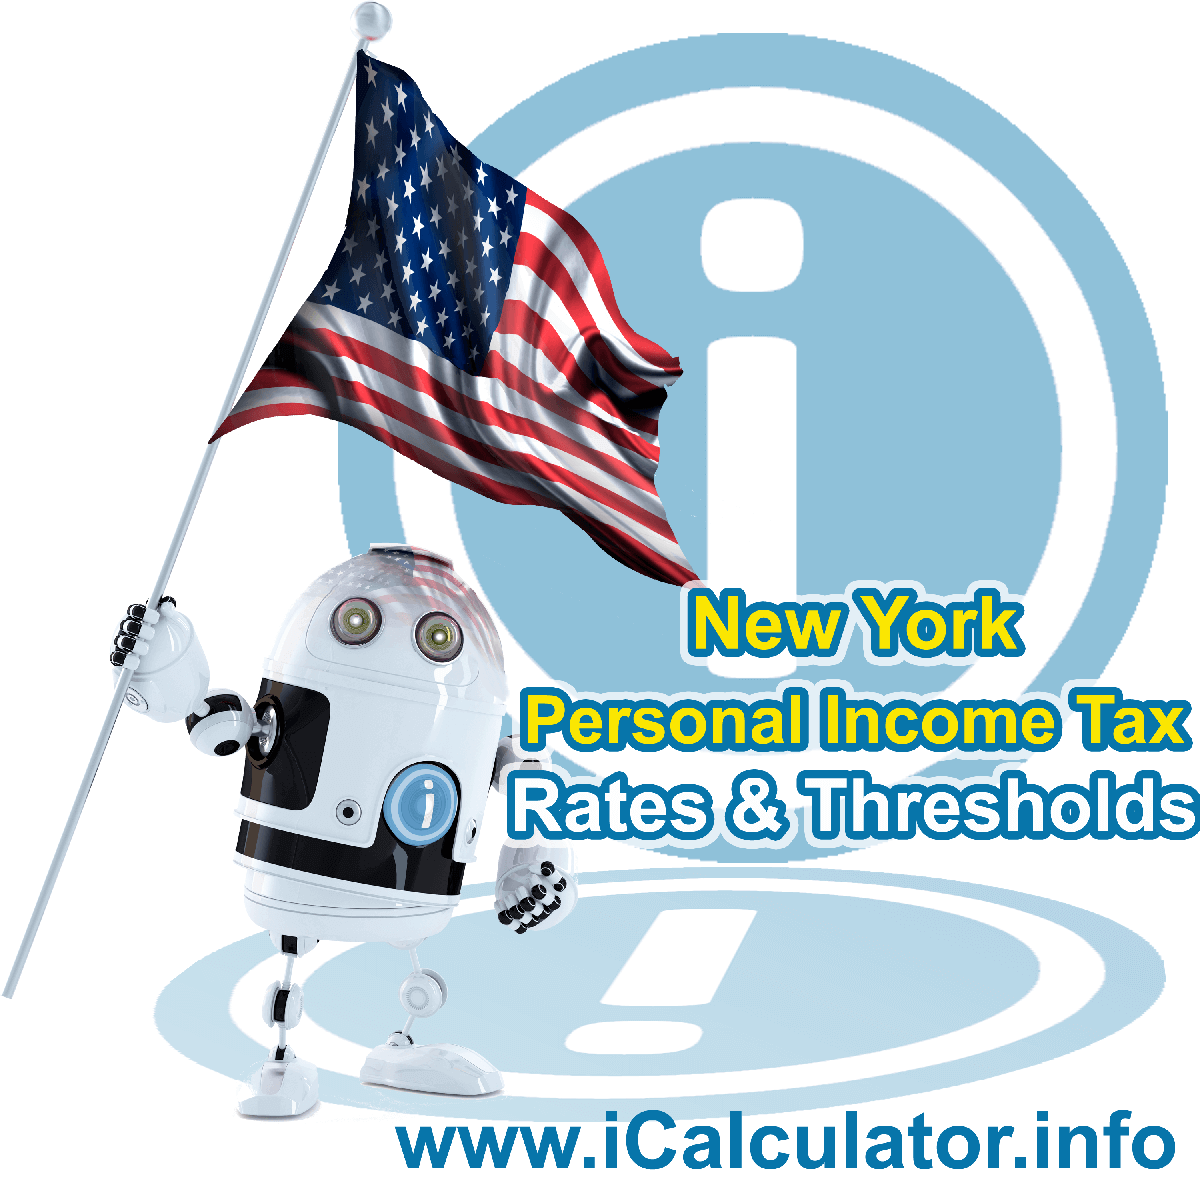 New York State Tax Tables 2023. This image displays details of the New York State Tax Tables for the 2023 tax return year which is provided in support of the 2023 US Tax Calculator